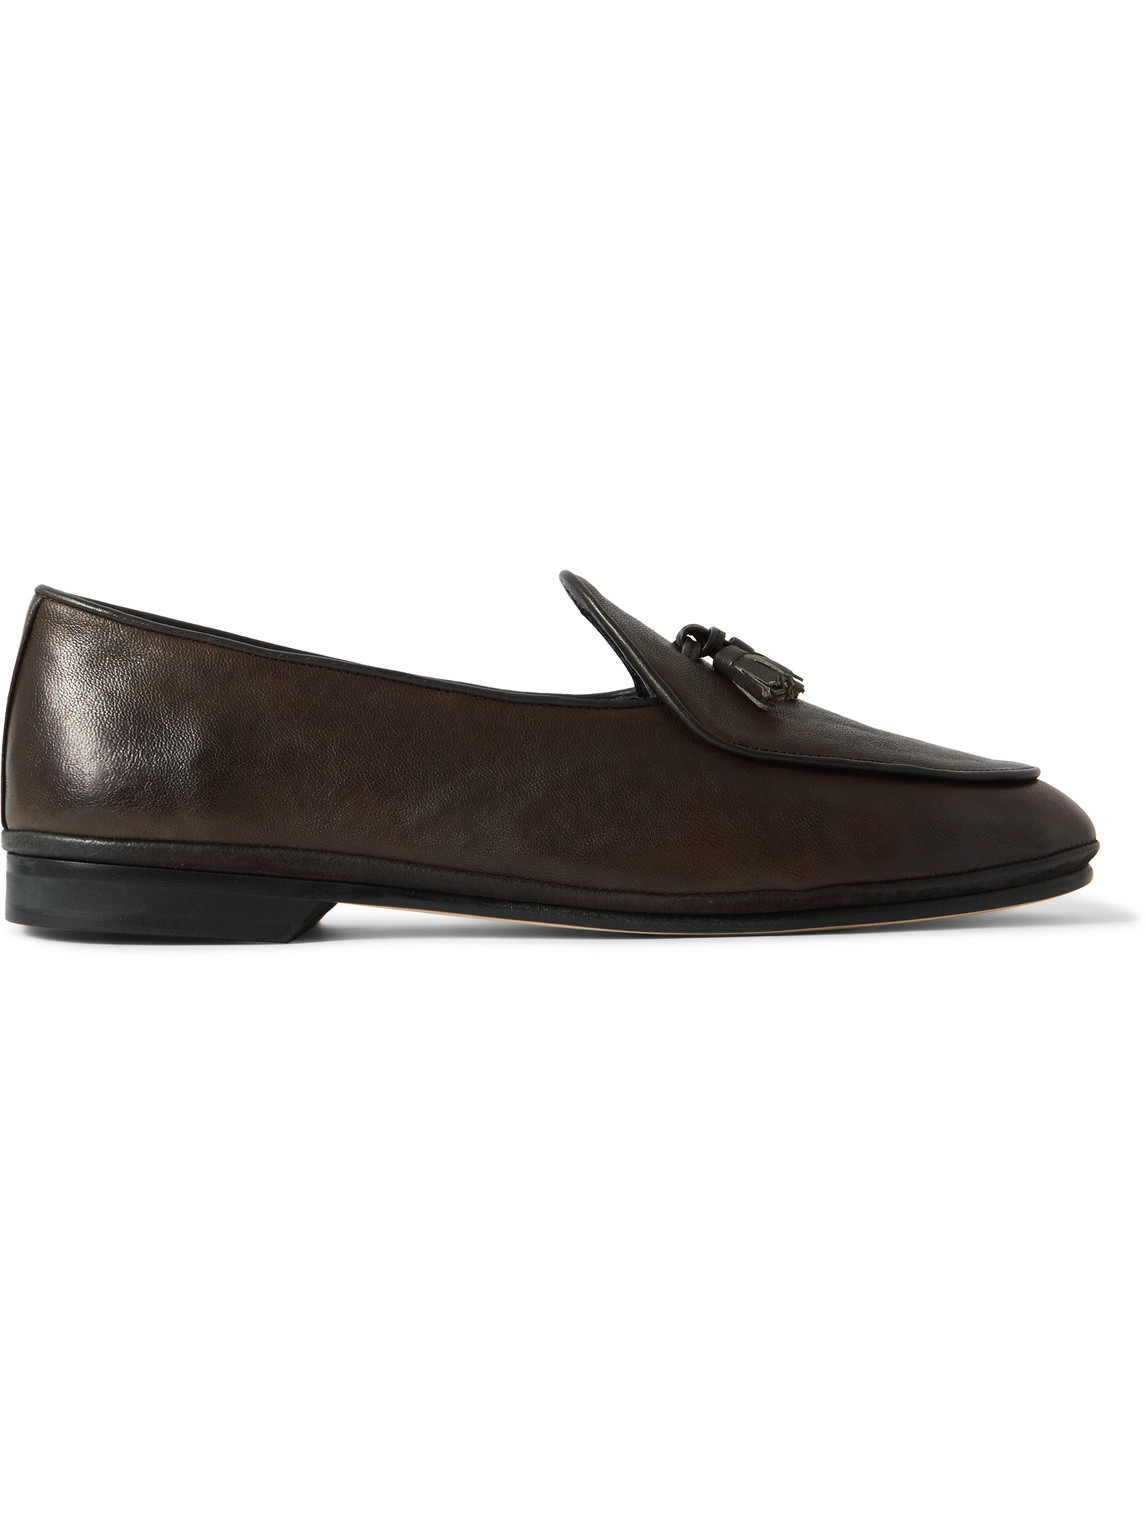 Tasselled Leather Loafers